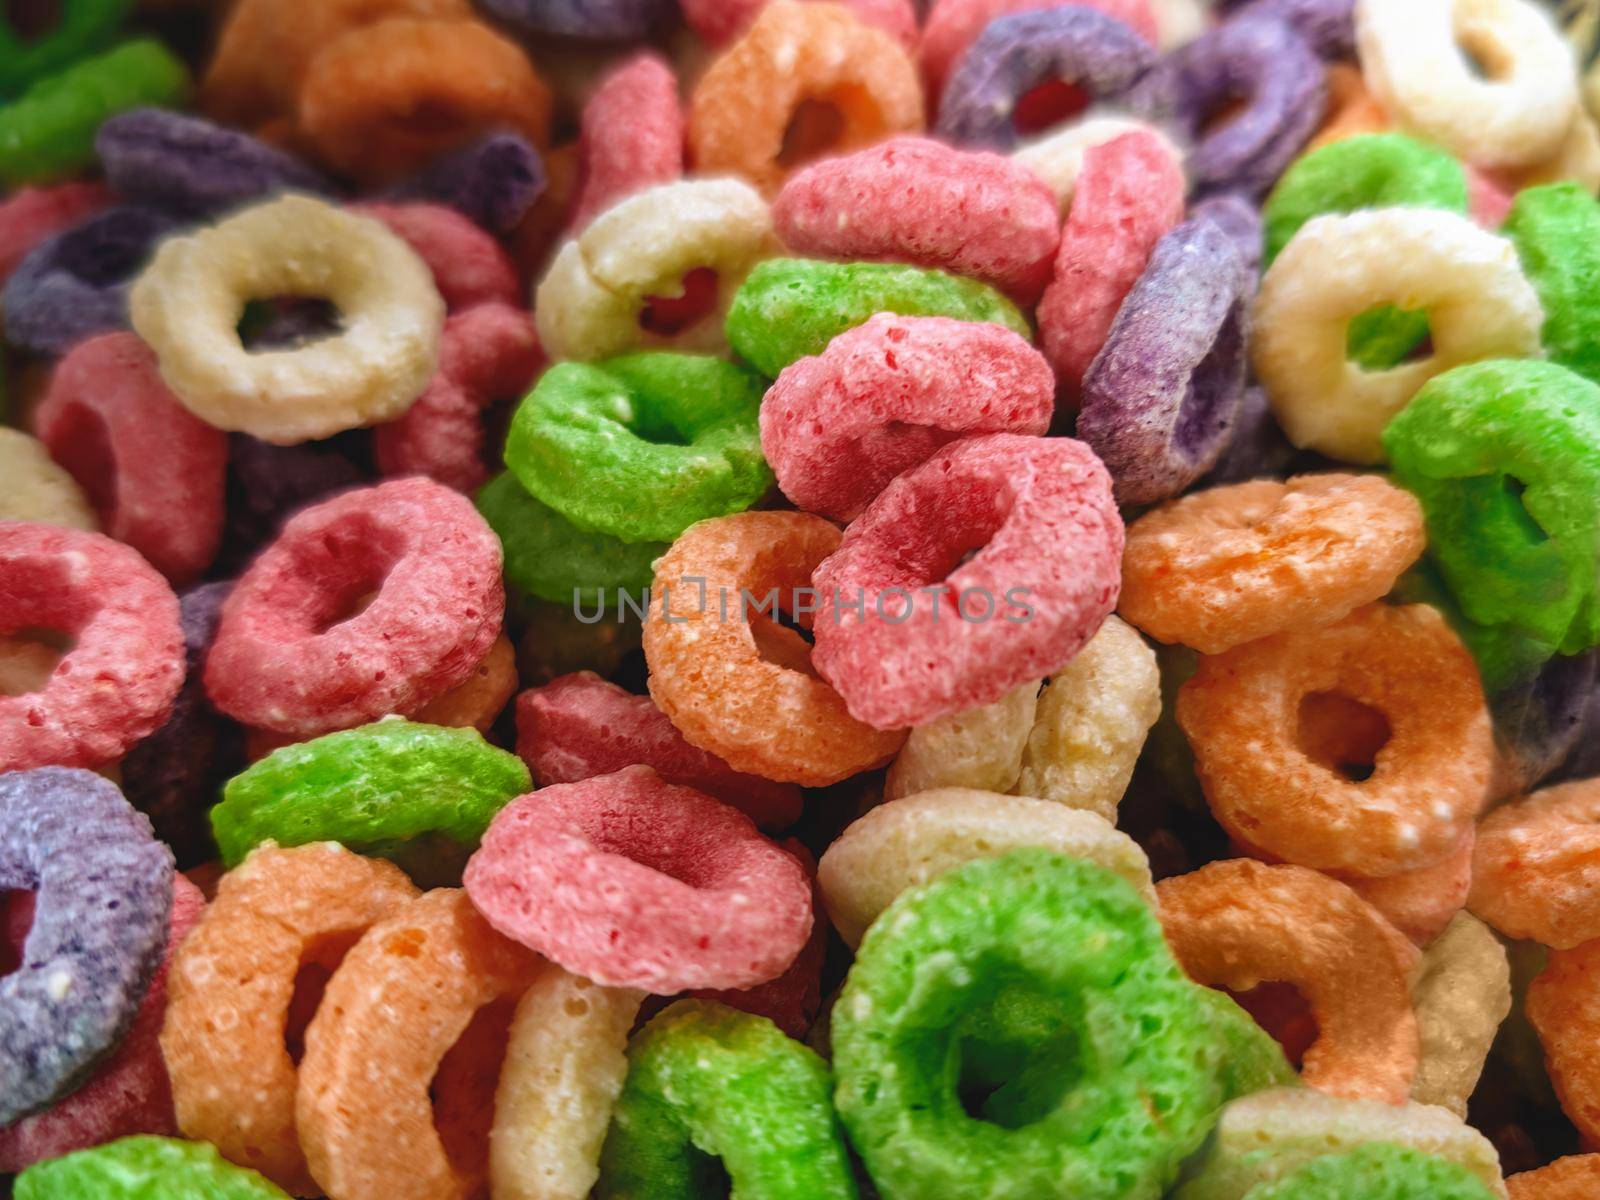 Colorful fruit sugary corn cereal rings. Highly detailed macro close up shot of this nutritious and delicious breakfast and snack favorite.